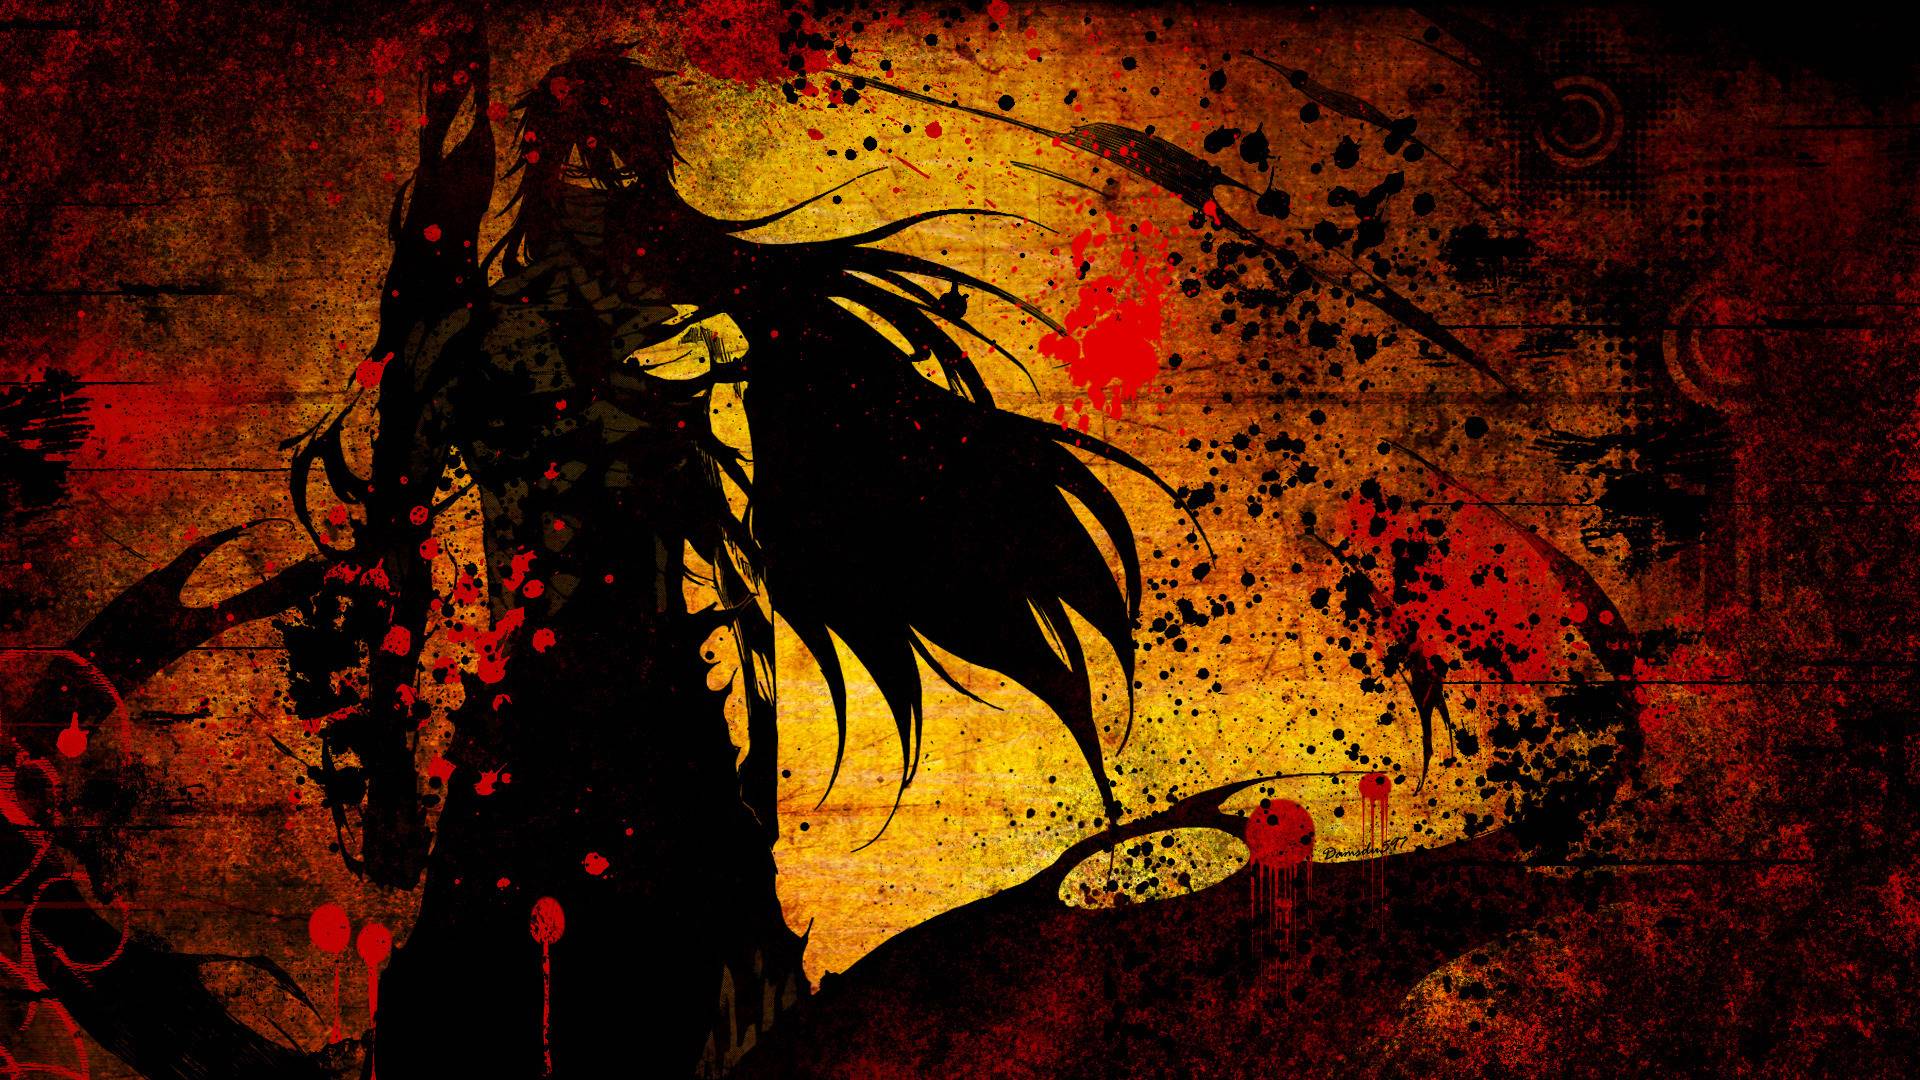 Dark Red Anime Wallpapers - Top Free Dark Red Anime Backgrounds